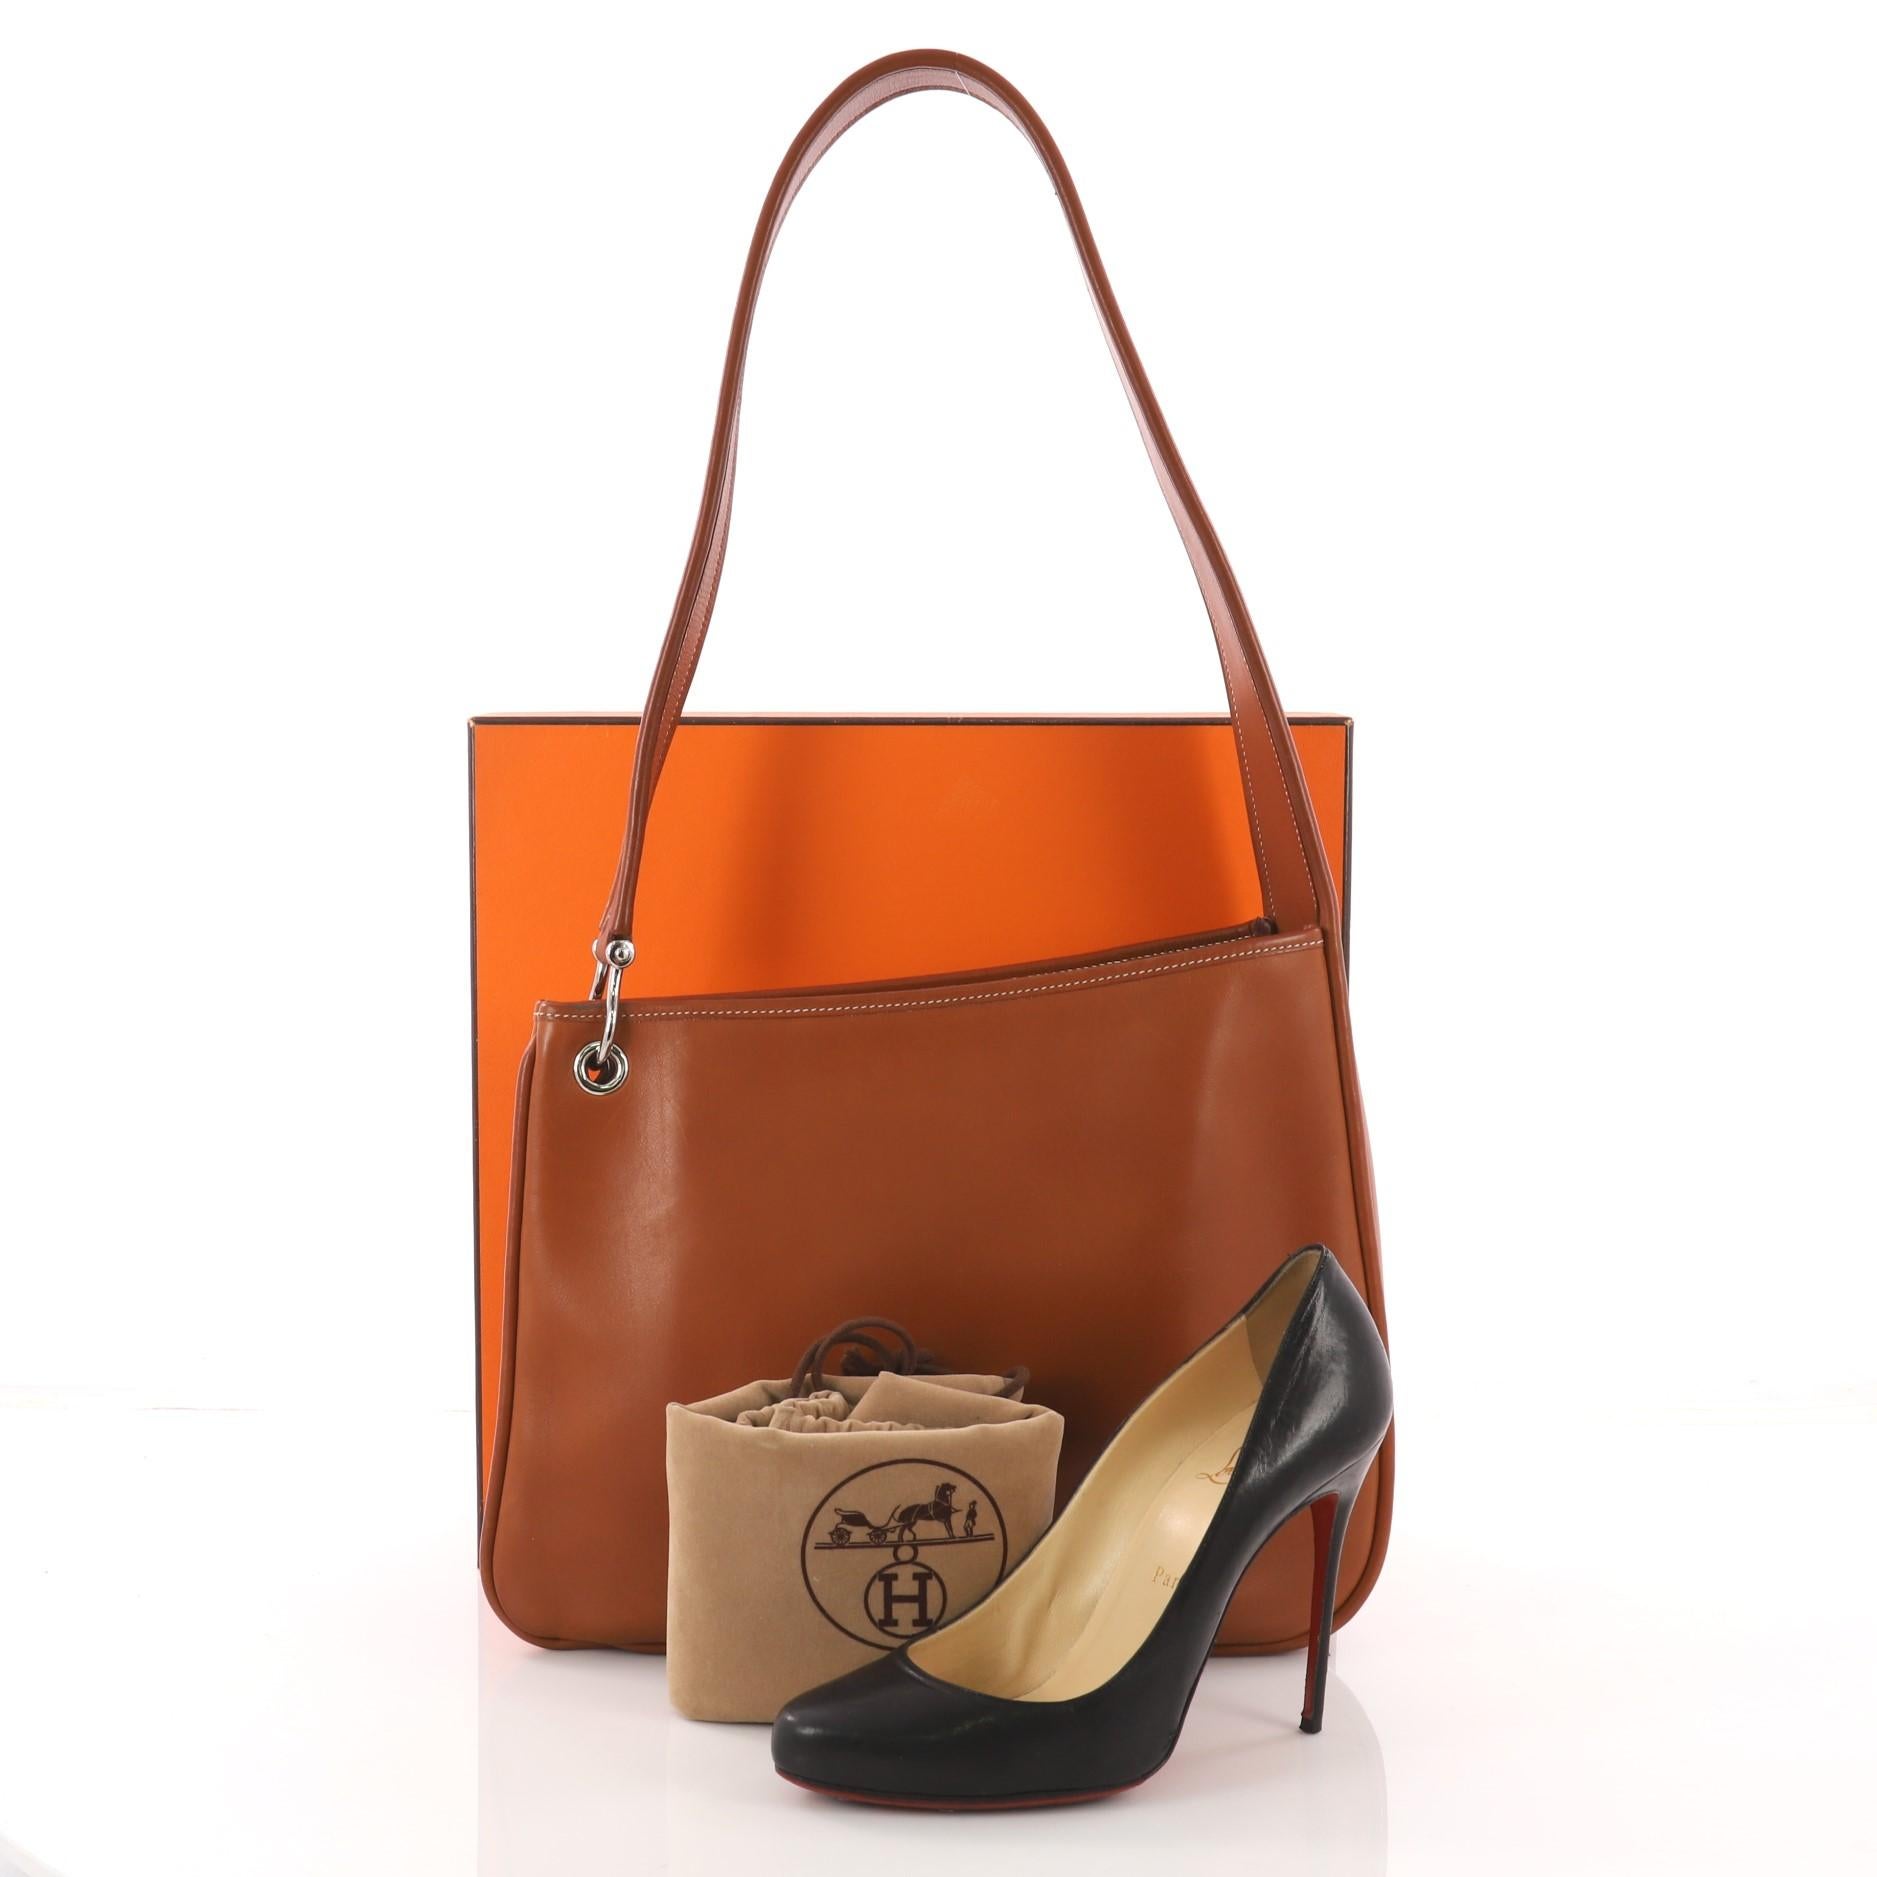 This Hermes Sac Manille II Handbag Leather, crafted in Fauve brown leather, features a wide looping shoulder strap and palladium-tone hardware. It opens to a brown leather interior with zip and slip pockets. **Note: Shoe photographed is used as a